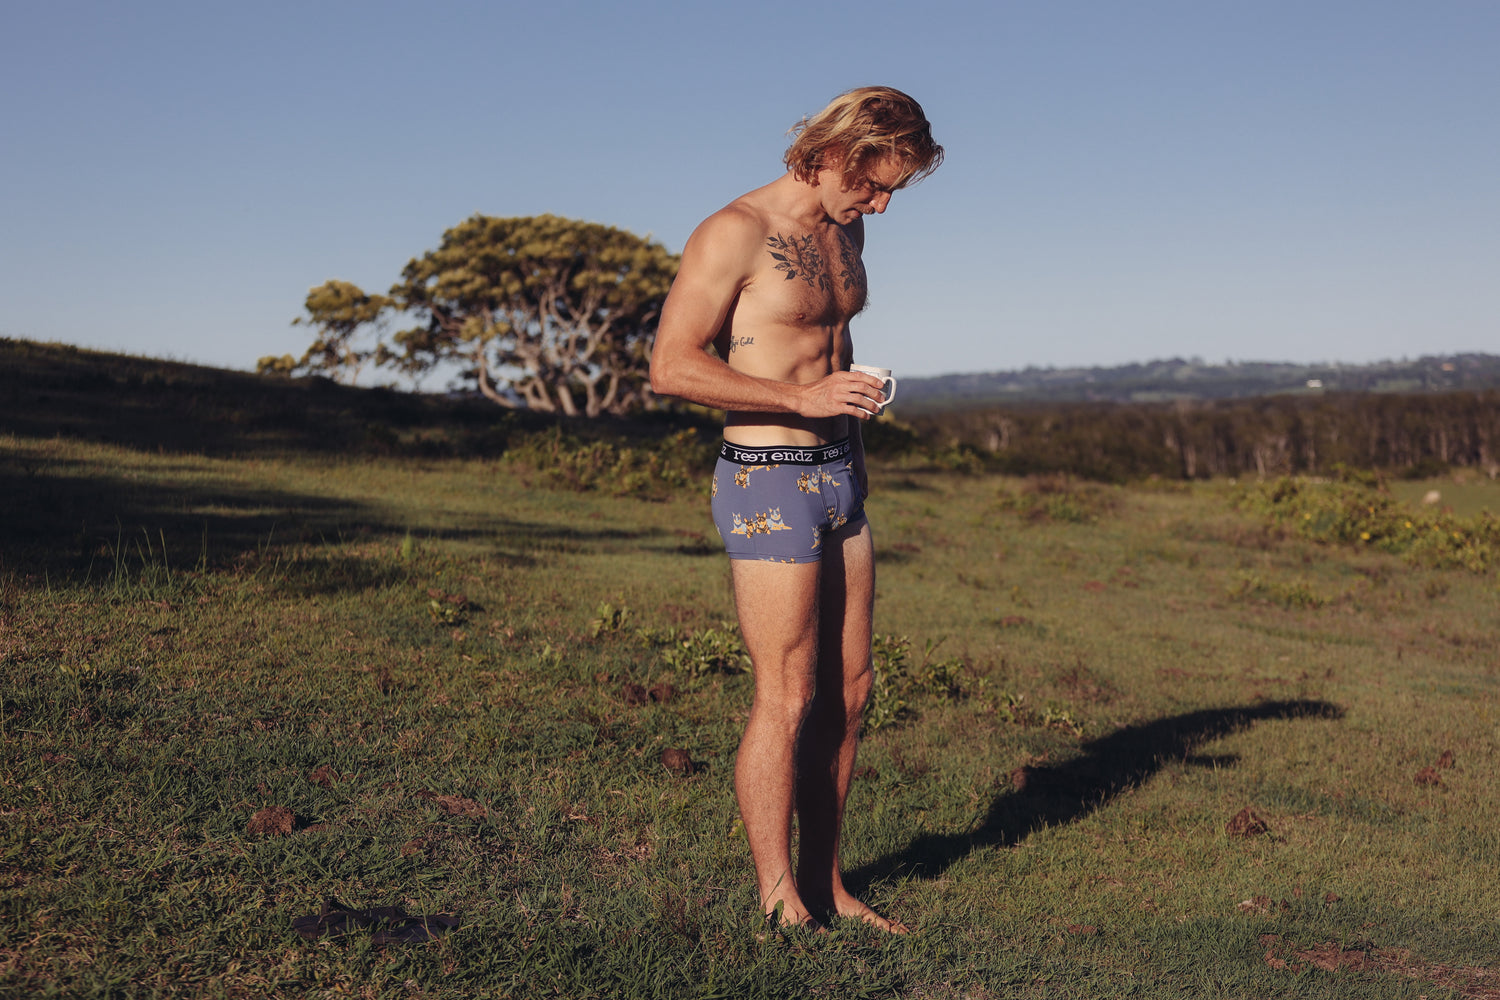 Product Collections – Reer Endz Underwear